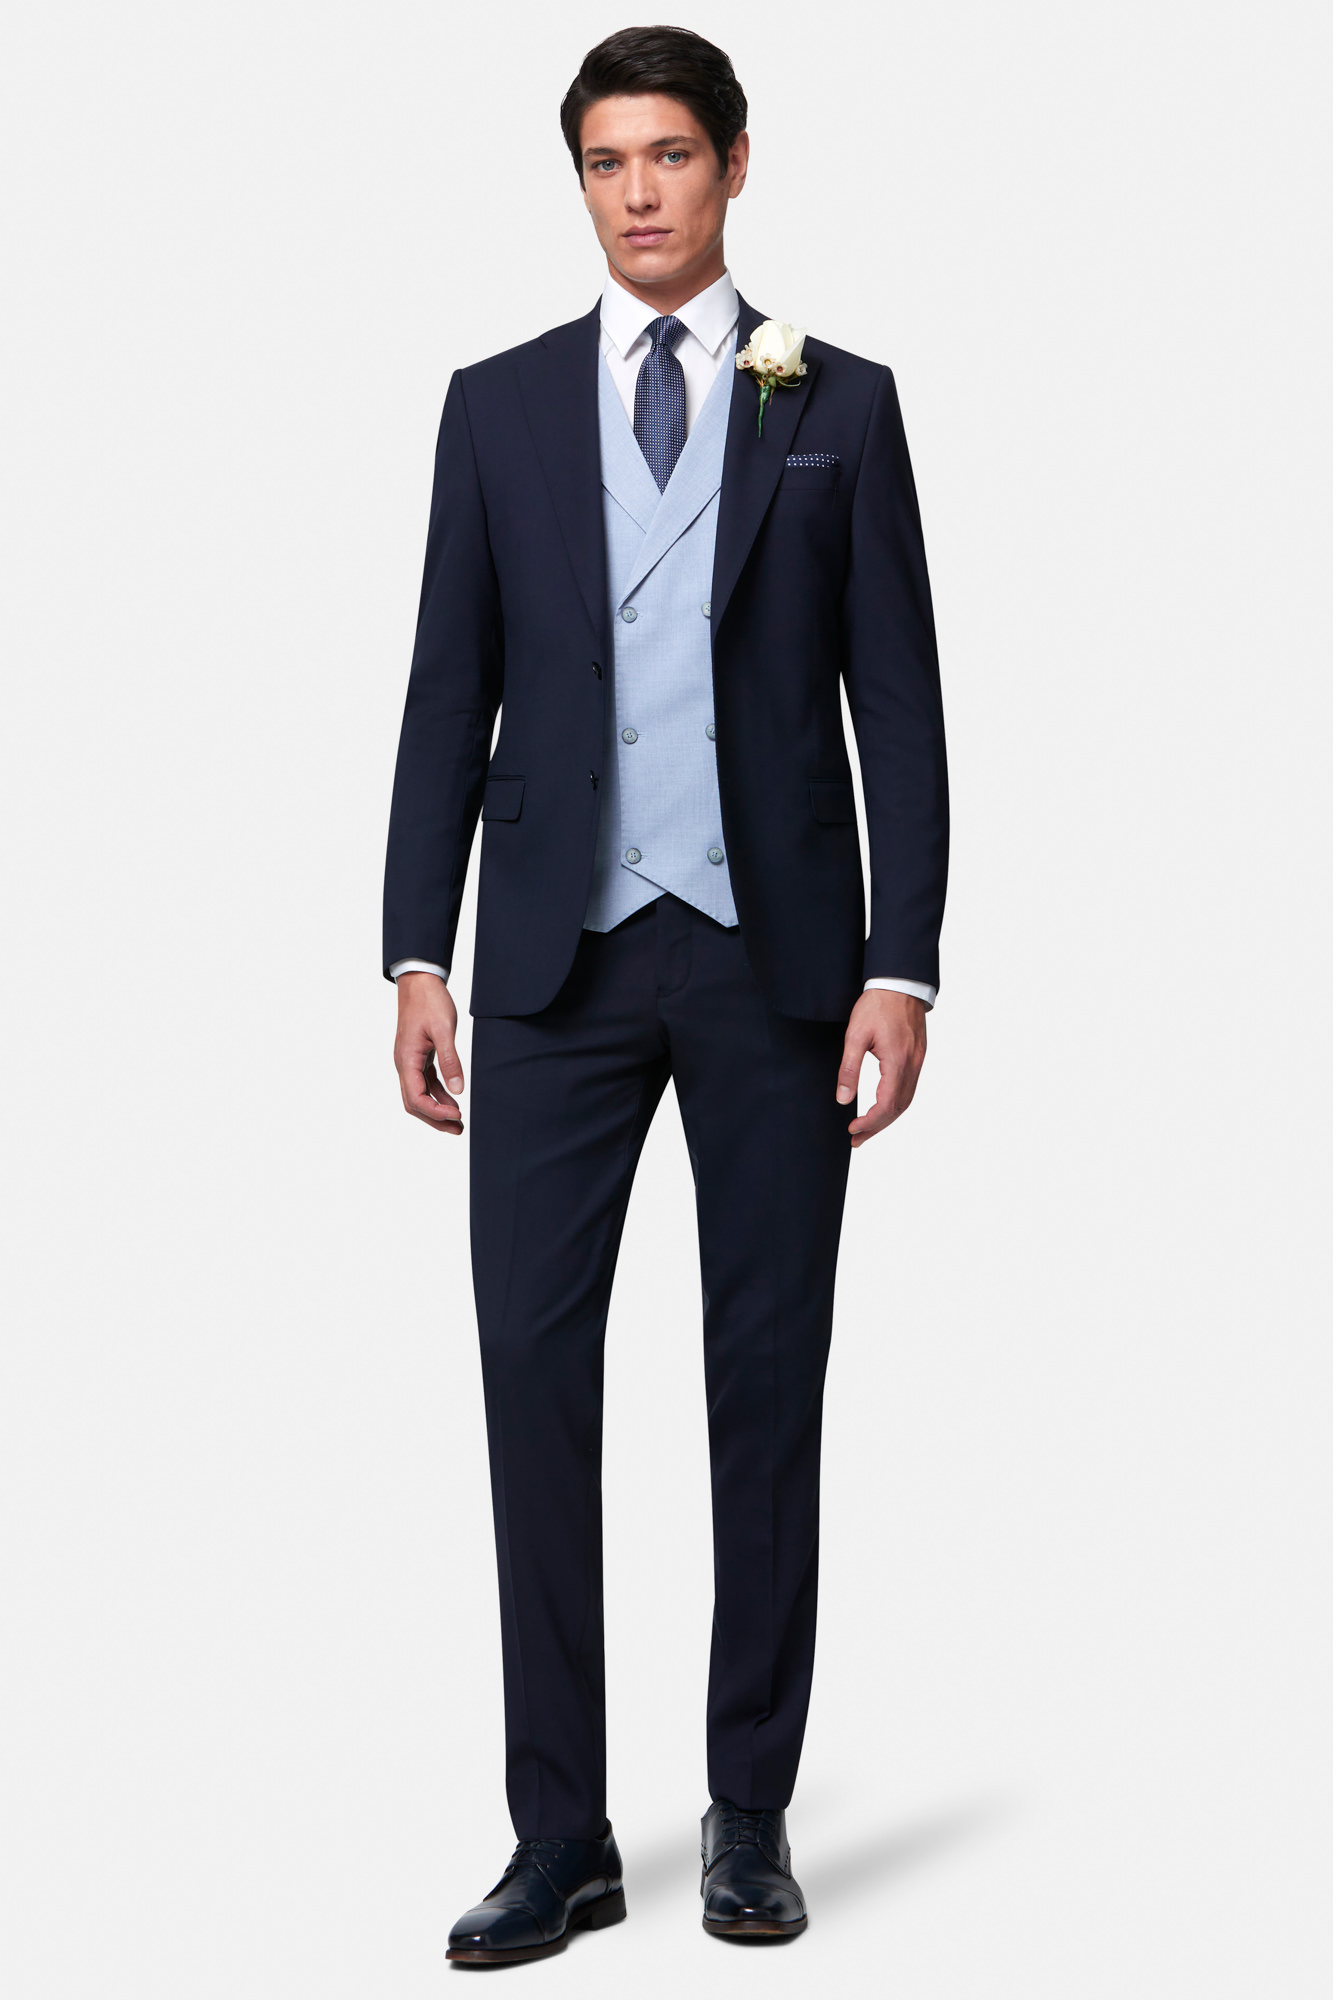 Best Navy Pinstripe Double Breasted suit - Tom Murphy's Formal and Menswear